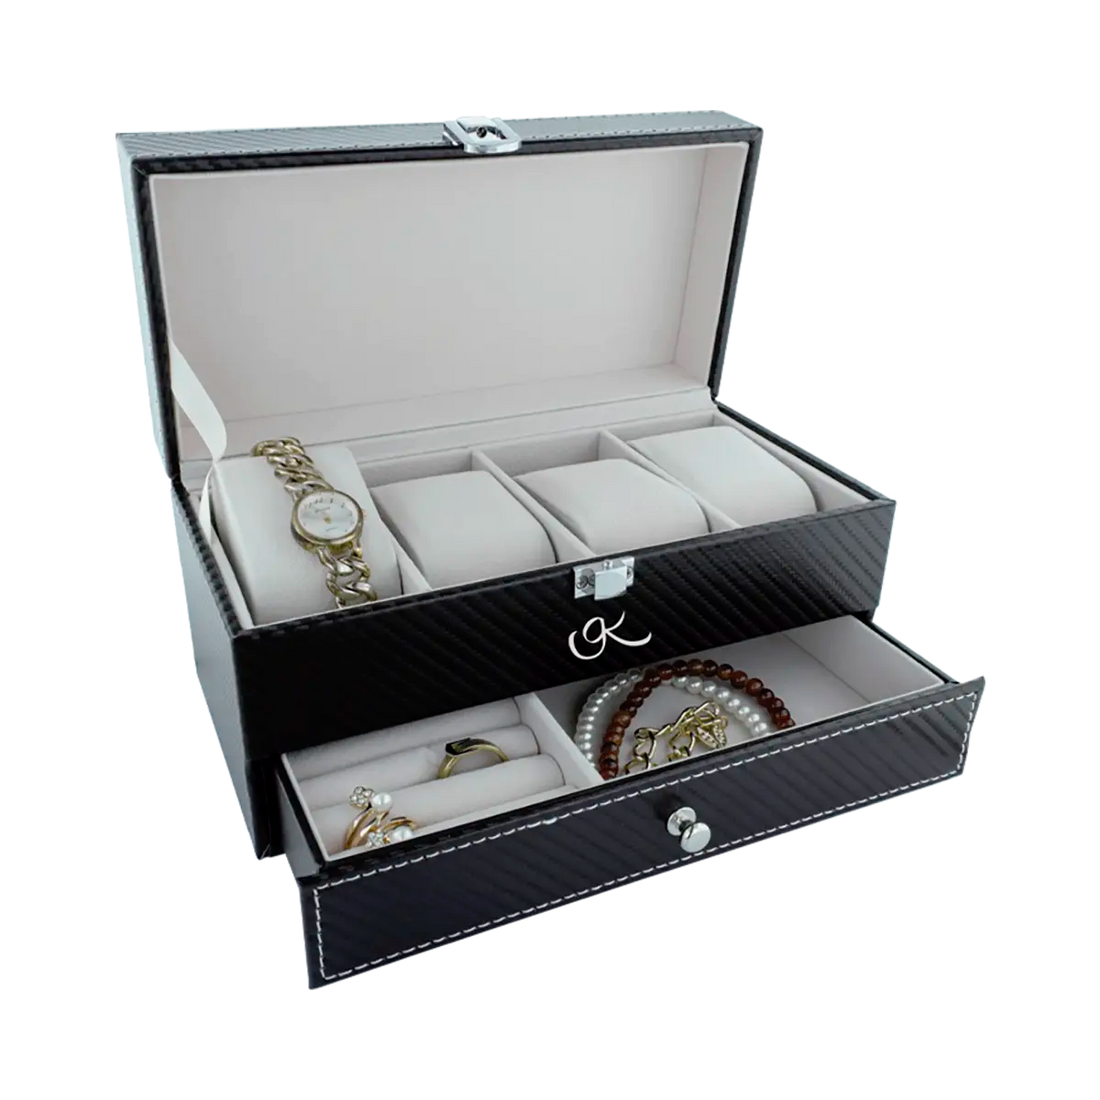 large black black vinyl jewlery and watch box for men and women. Accessory organizer, shop in San Diego, CA.